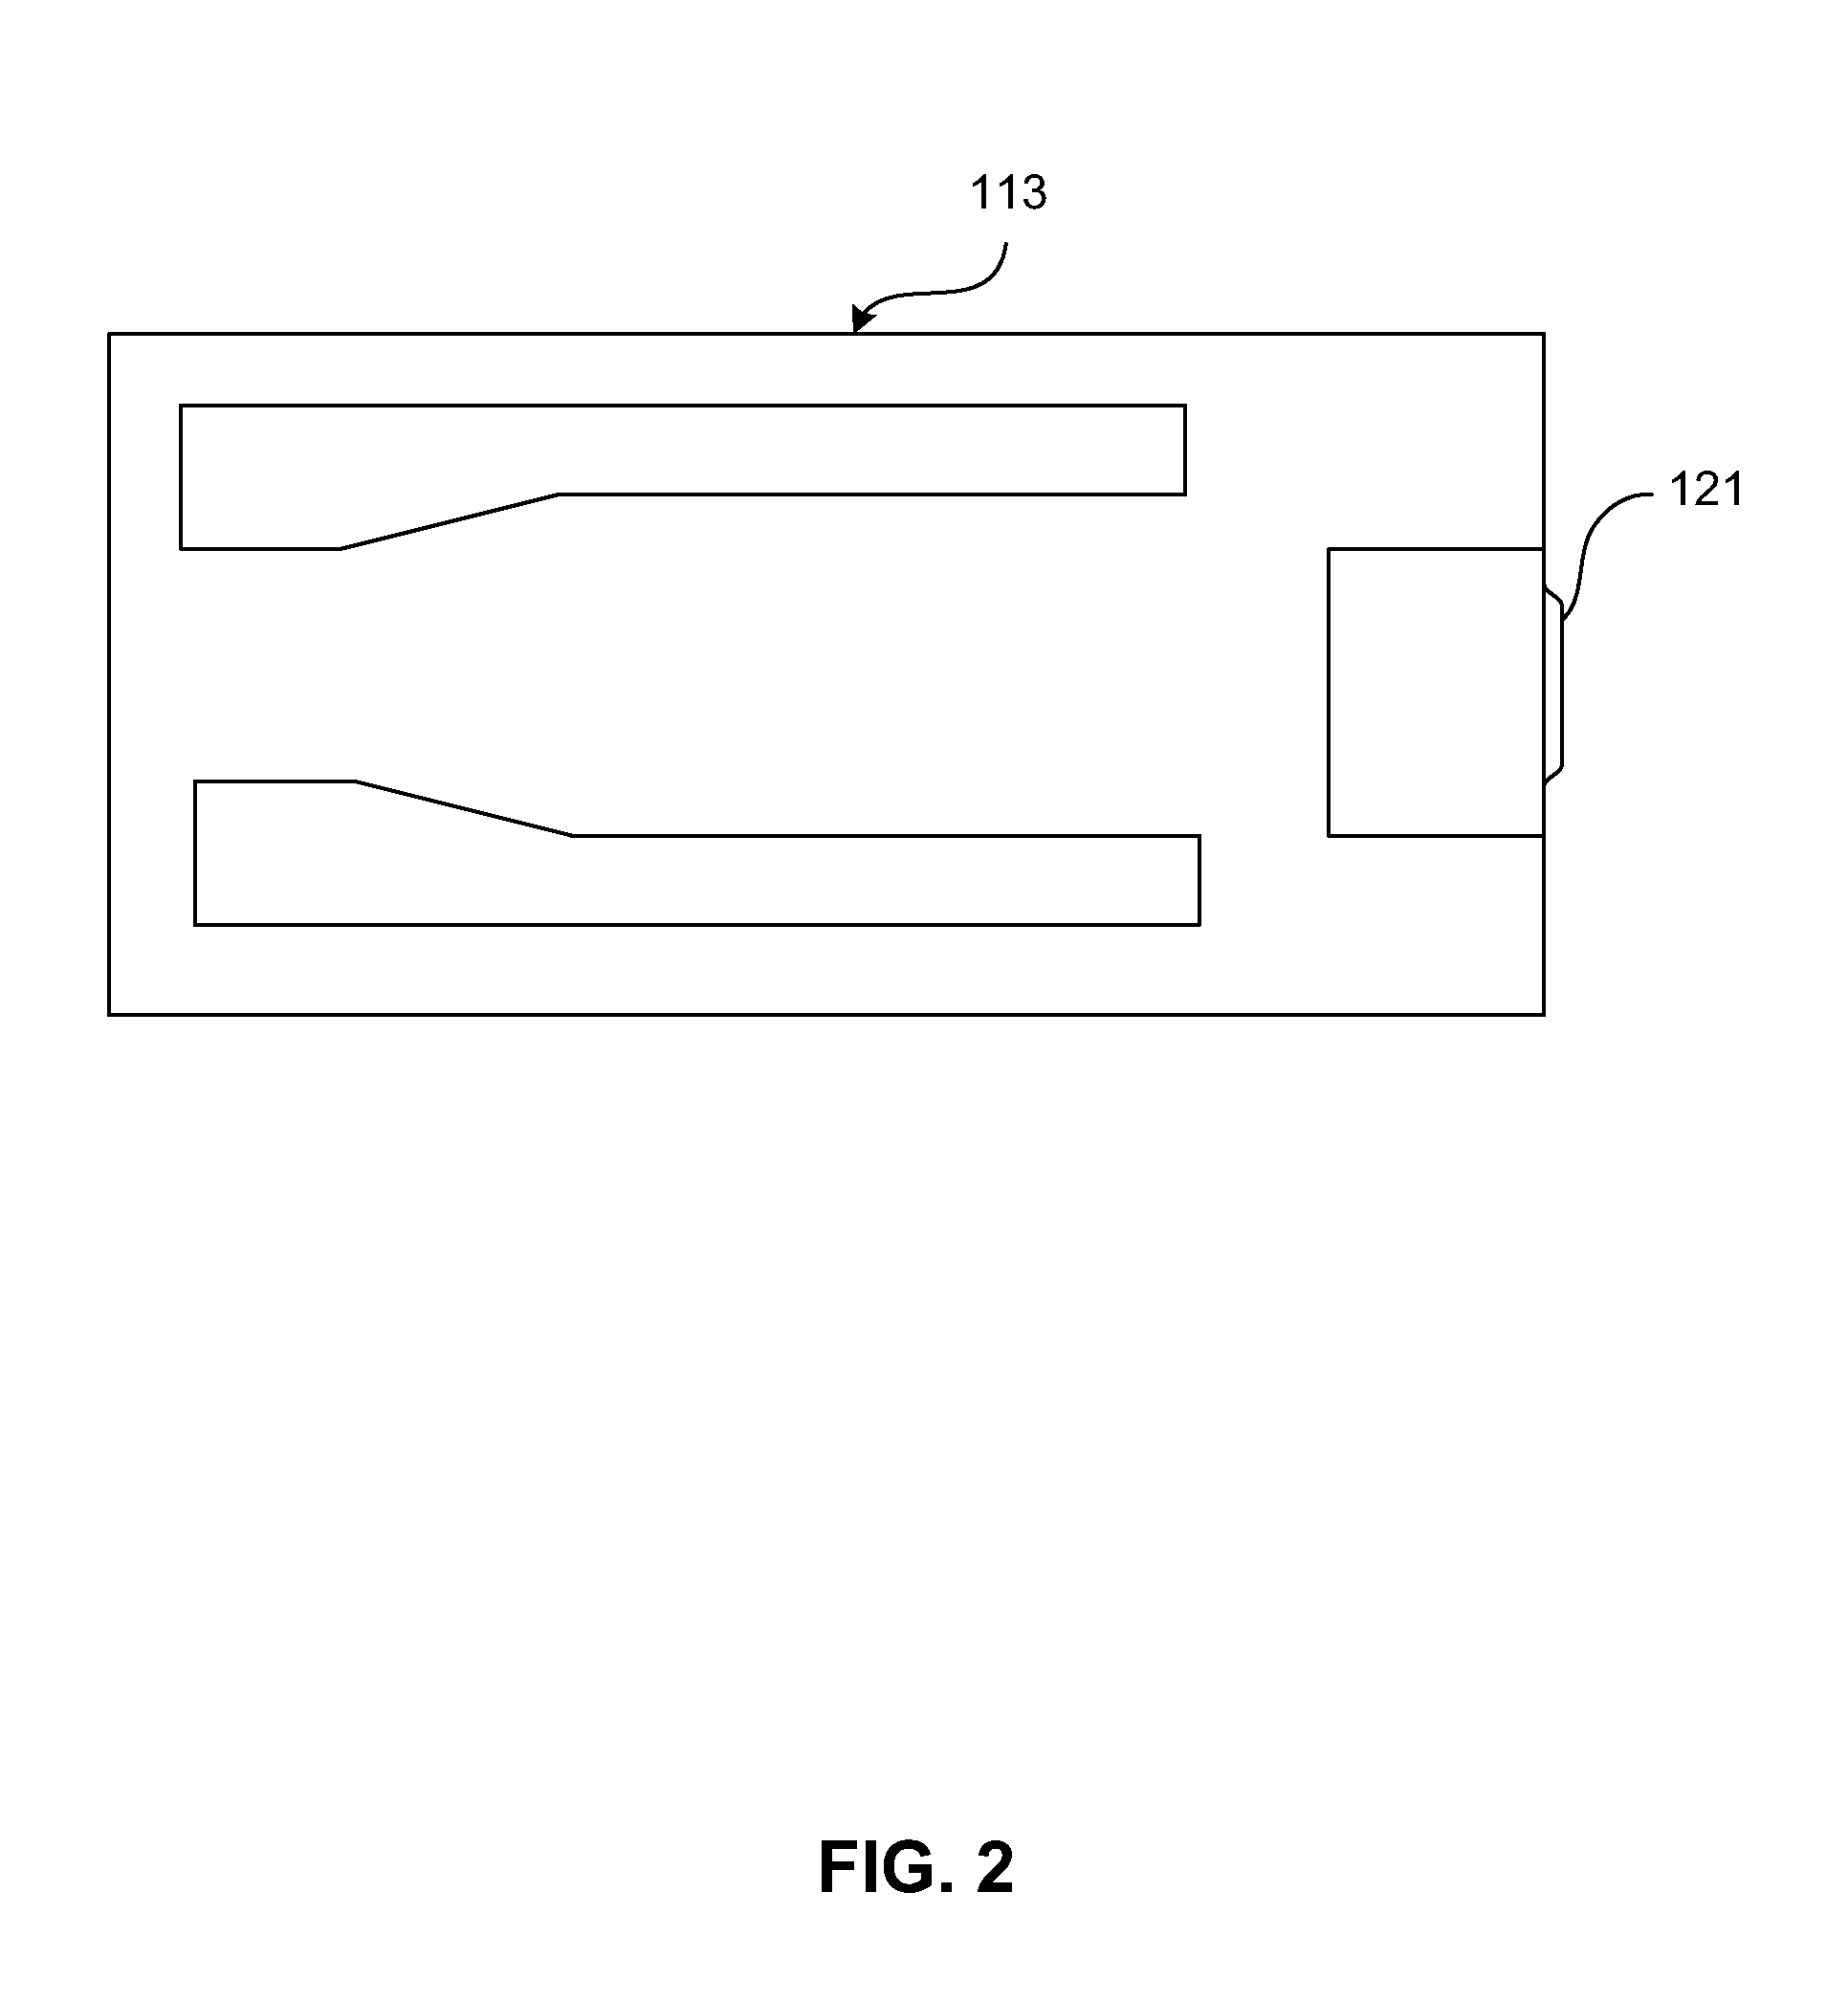 Magnetic read sensor with independently extended pinned layer and seed layer